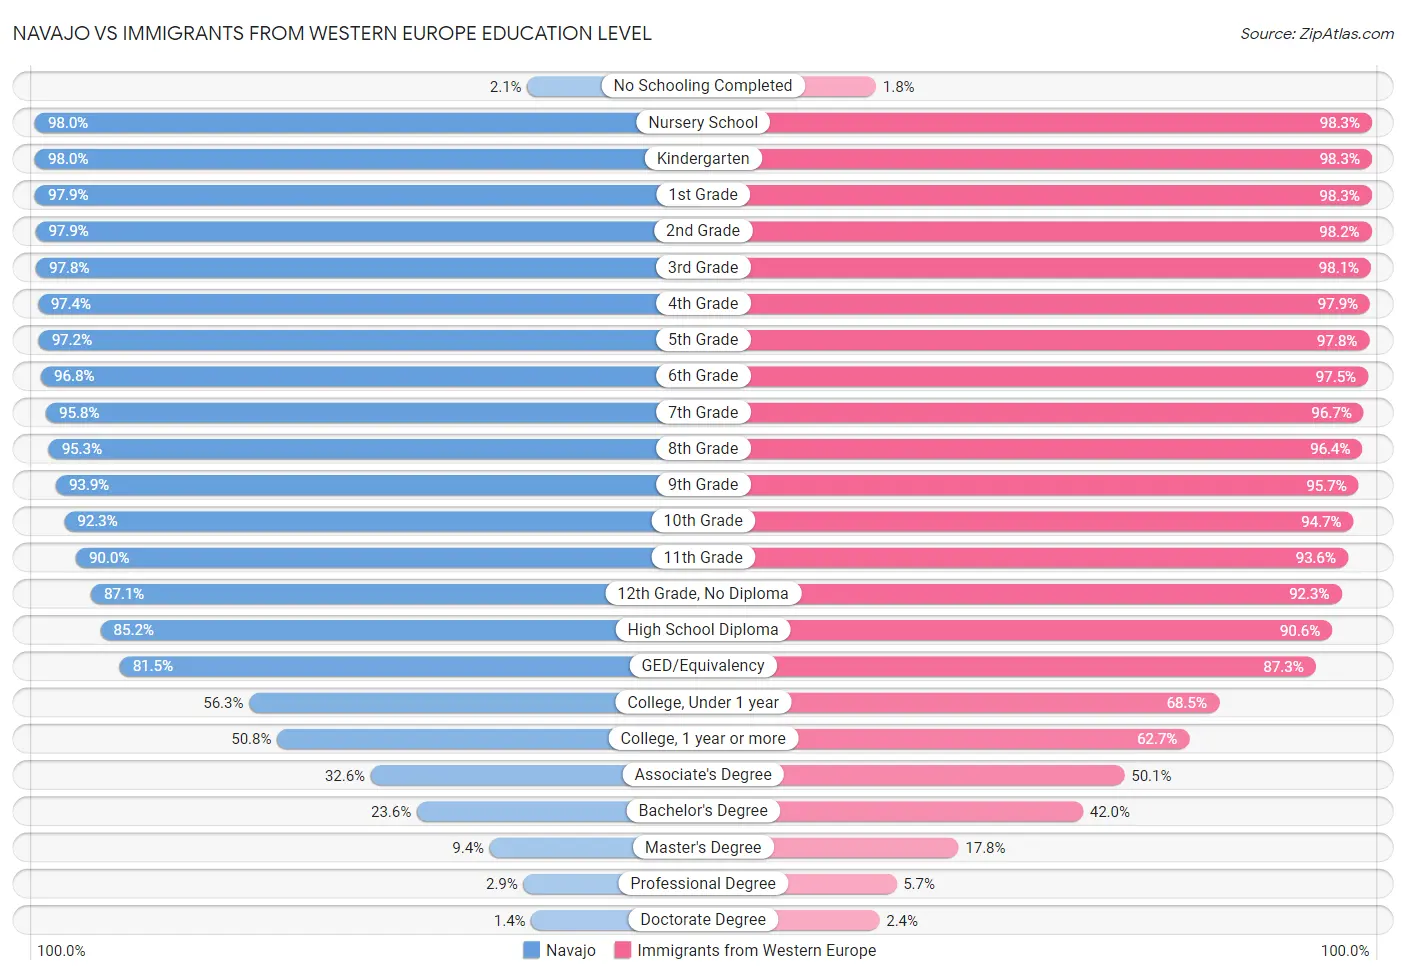 Navajo vs Immigrants from Western Europe Education Level